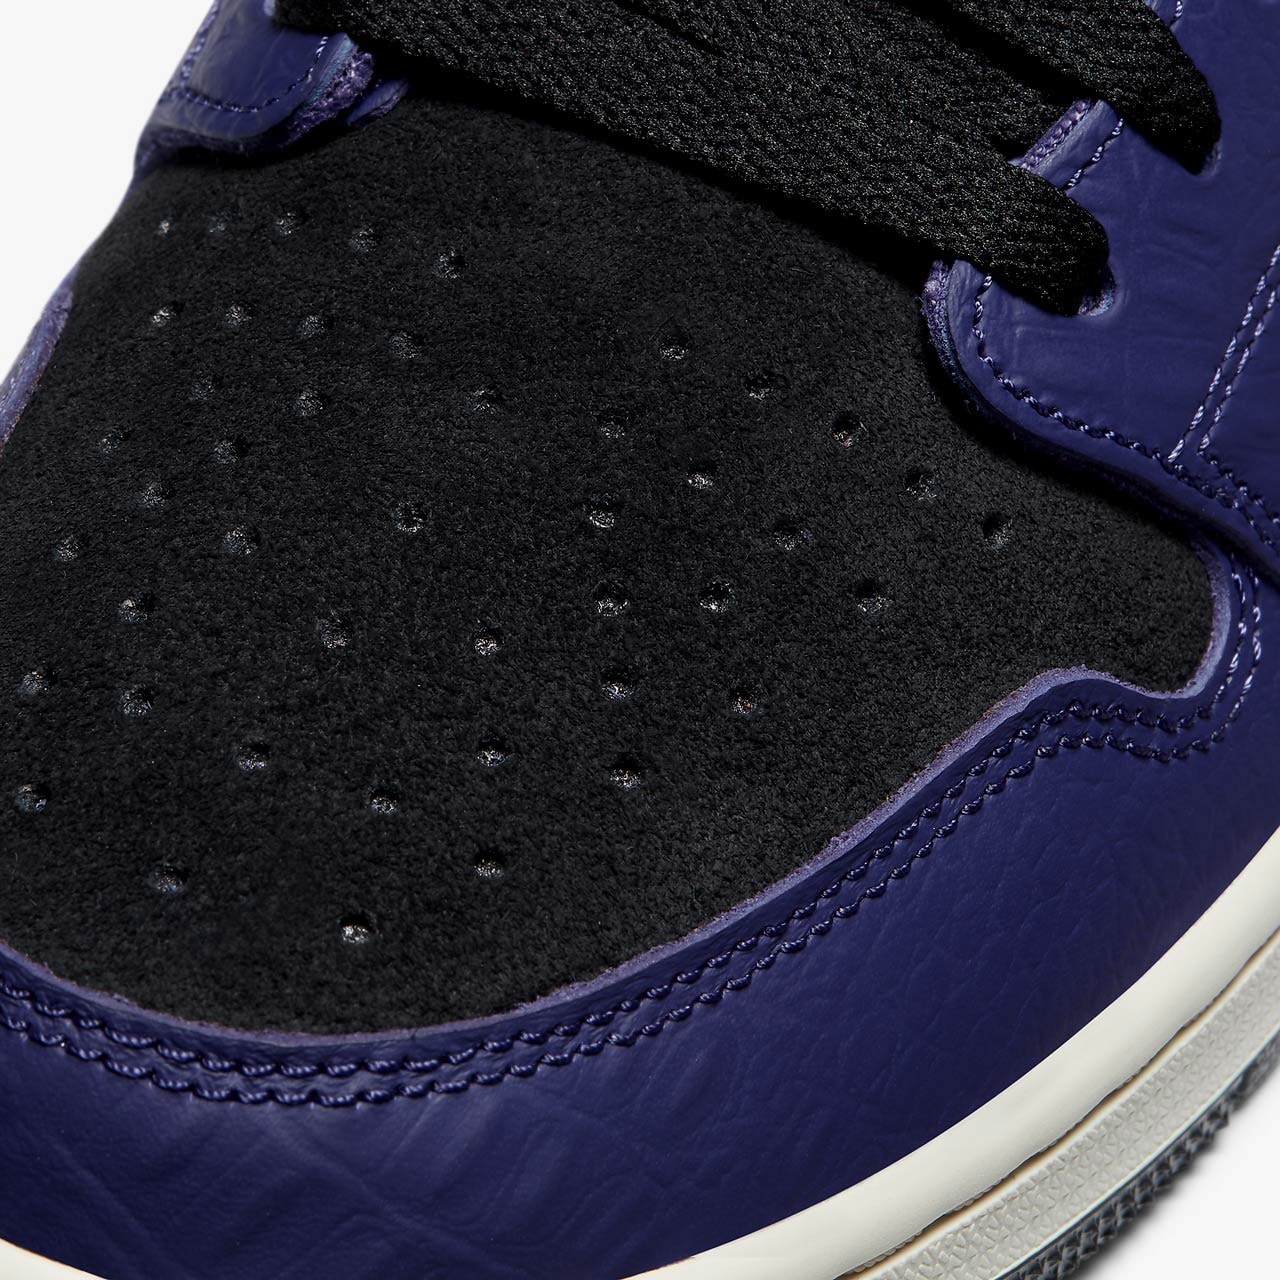 air jordan brand 1 high zoom cmft comfort bayou boys zion williamson new orchid purple blue lime blast black DC2133 500 official release date info photos price store list buying guide